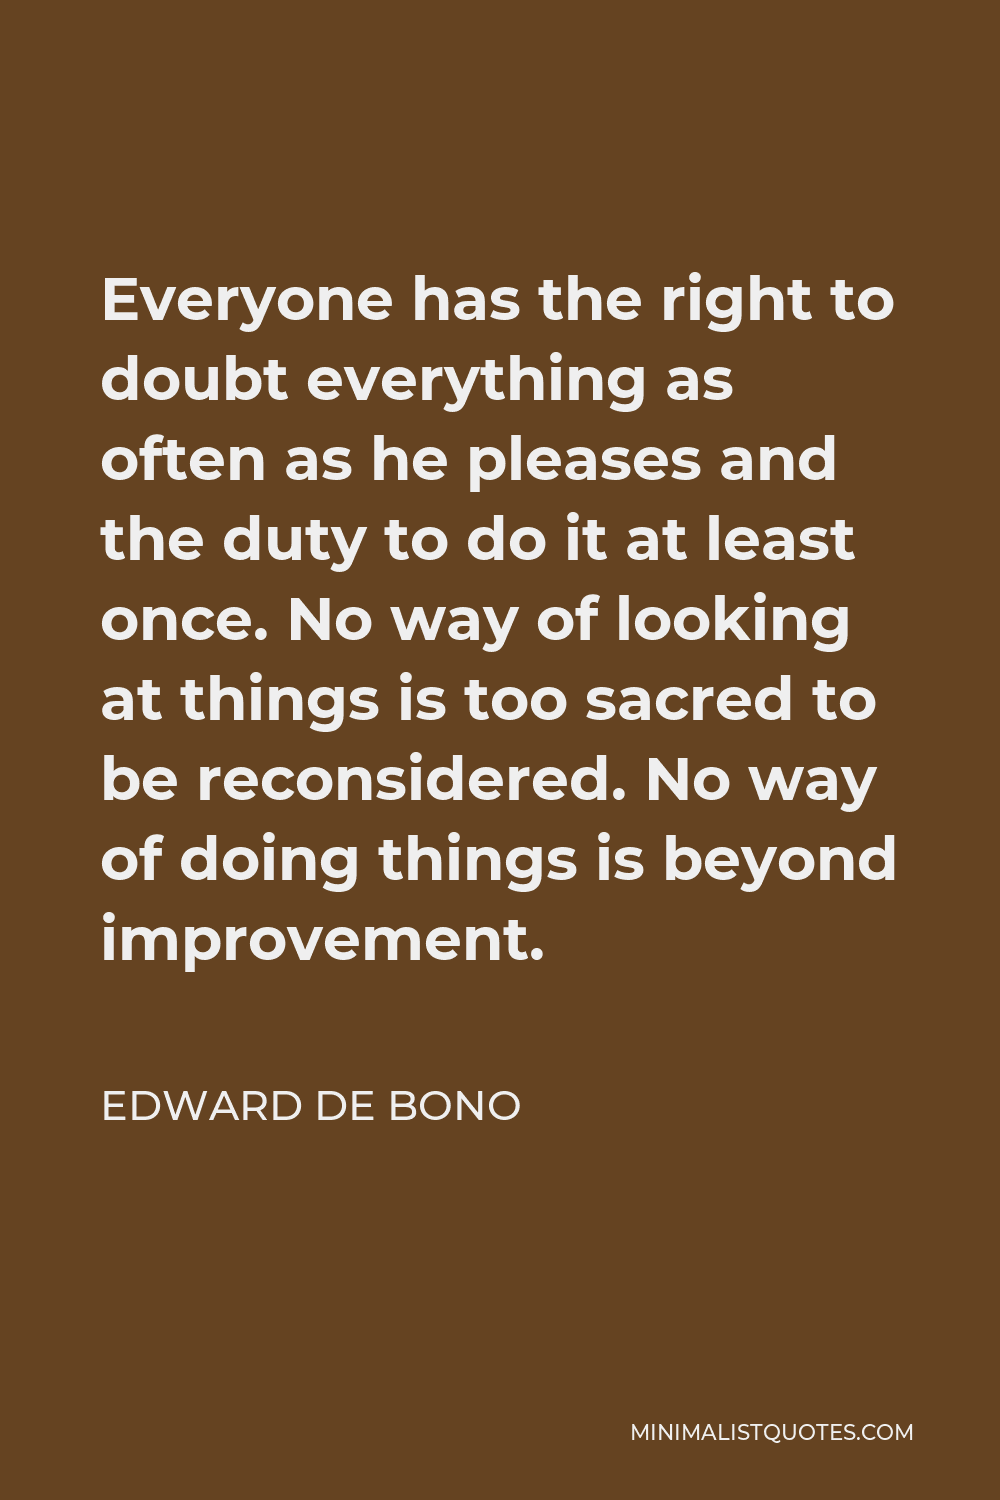 Edward de Bono Quote - Everyone has the right to doubt everything as often as he pleases and the duty to do it at least once. No way of looking at things is too sacred to be reconsidered. No way of doing things is beyond improvement.